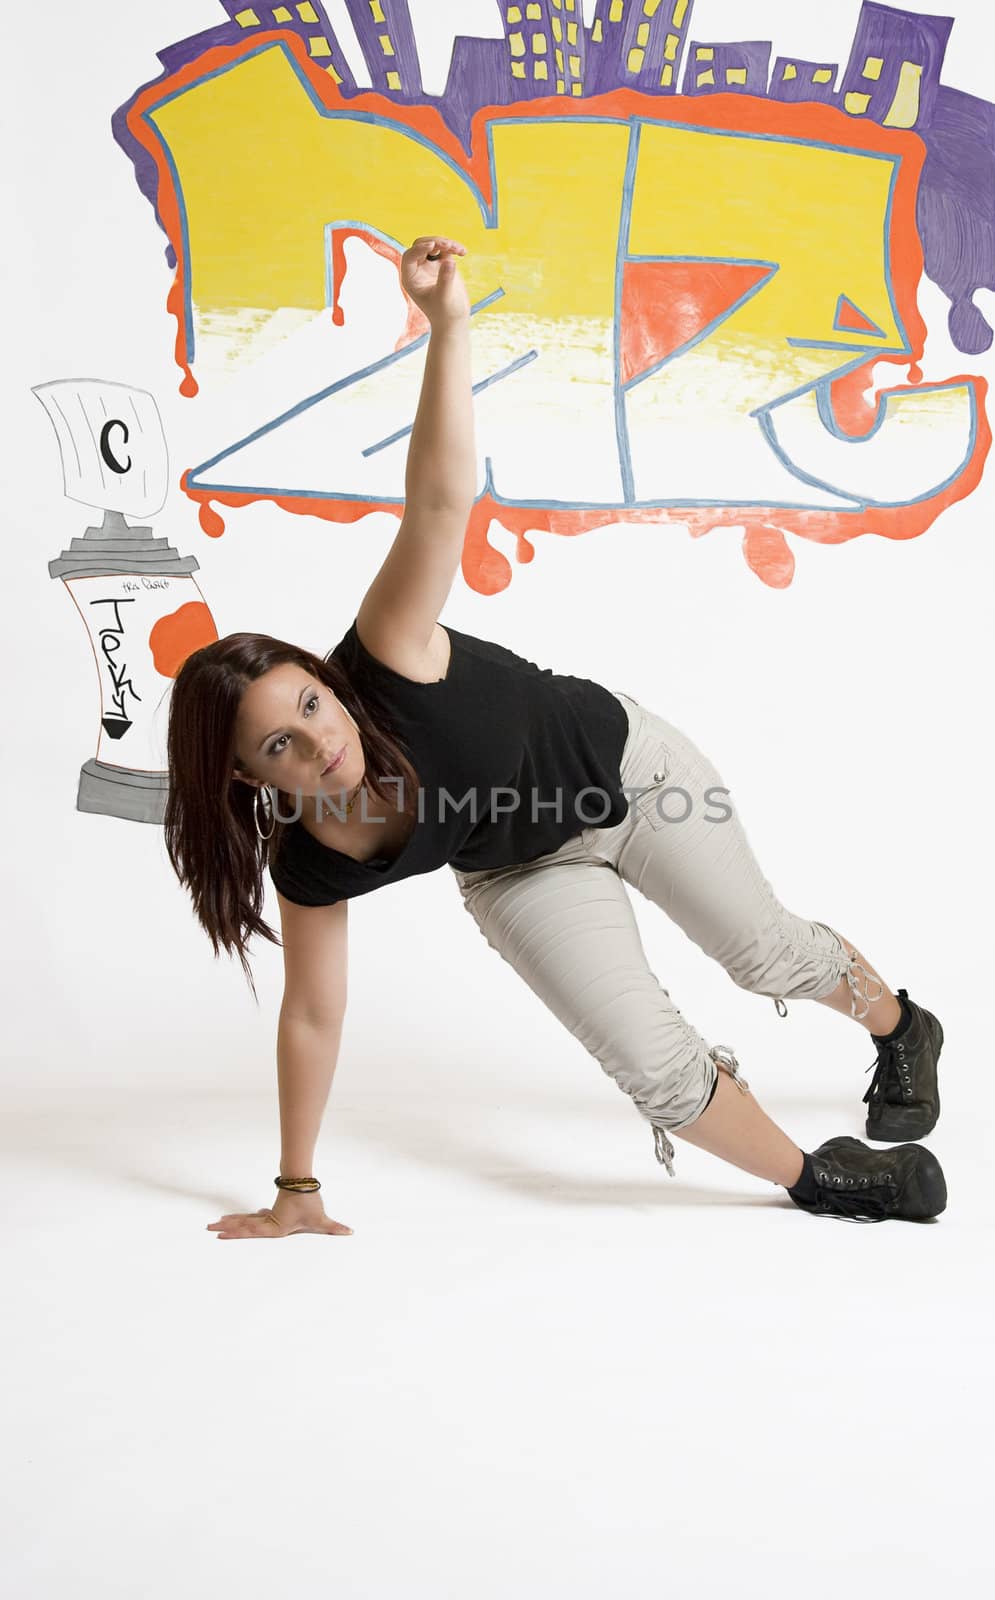 young women in the middle of a breakdancing move balancing on her hand done in front of a graffiti background